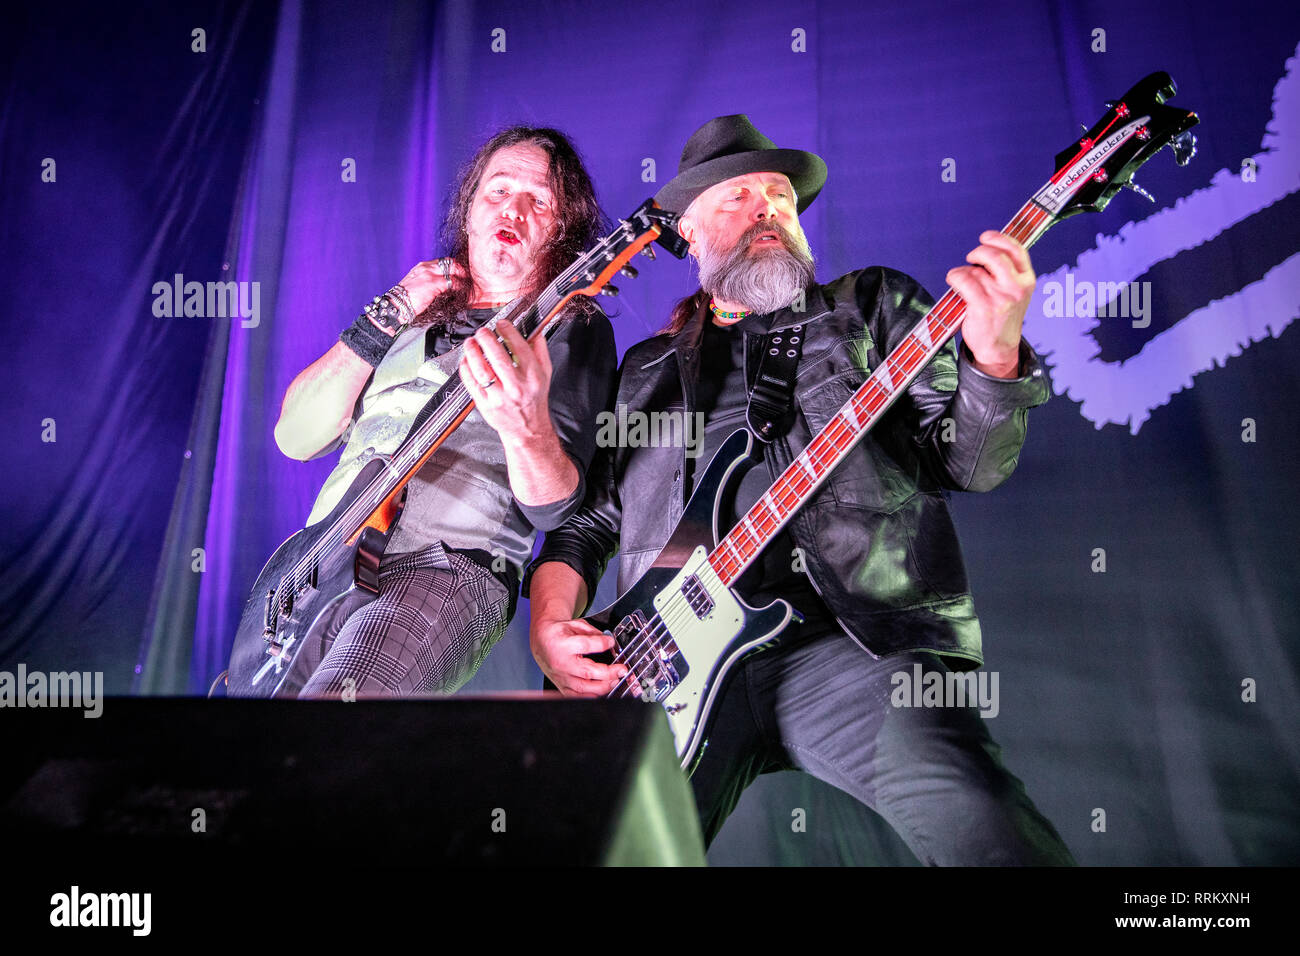 Norway, Oslo - February 21, 2019. The Swedish doom metal band Candlemass performs a live concert at Oslo Spektrum in Oslo. Here guitarist Mats Björkman is seen live on stage with bass player Leif Edling. (Photo credit: Gonzales Photo - Terje Dokken). Stock Photo